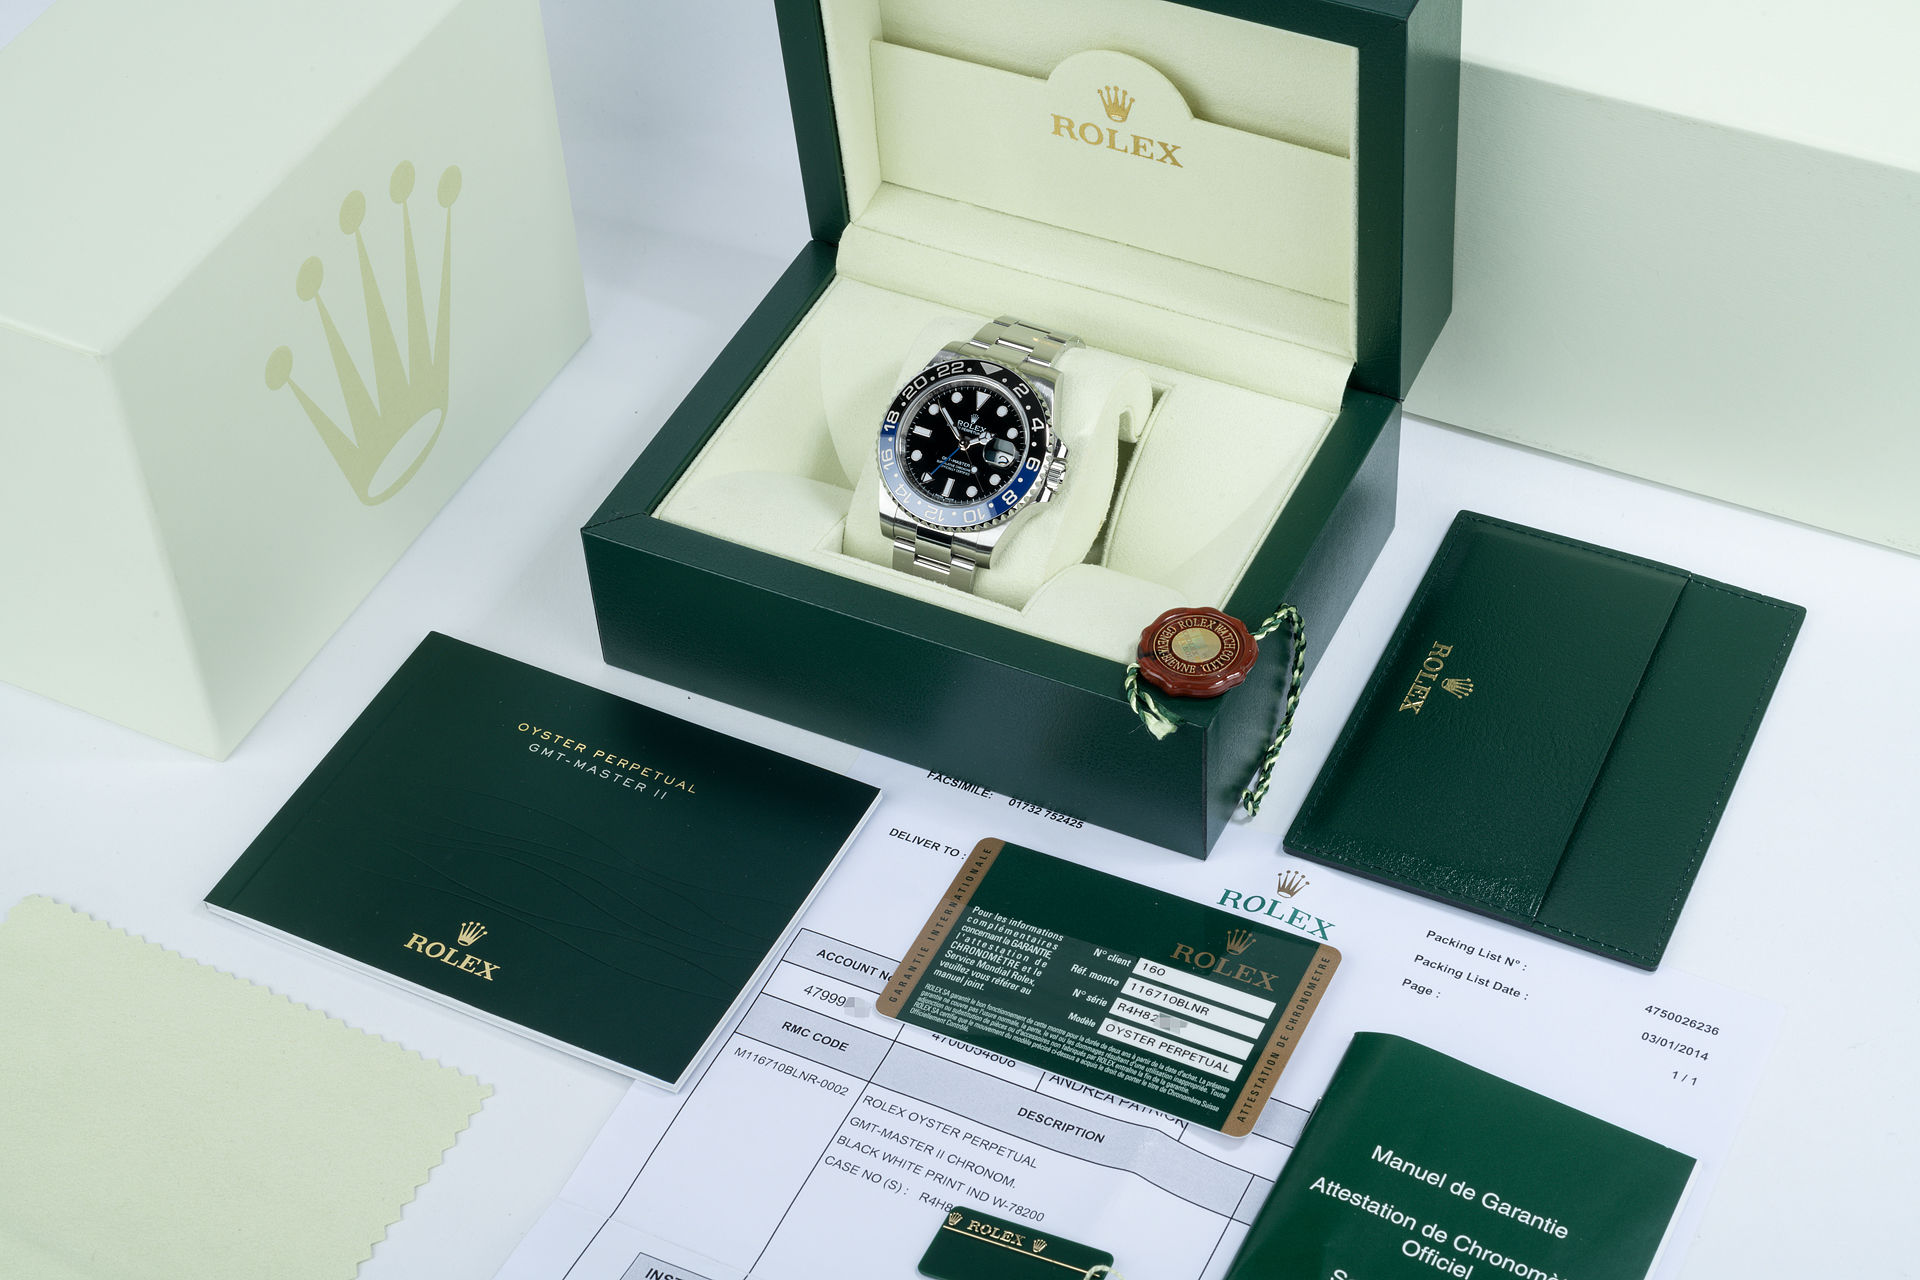 ref 116710BLNR | Box and Certificate  | Rolex GMT-Master II